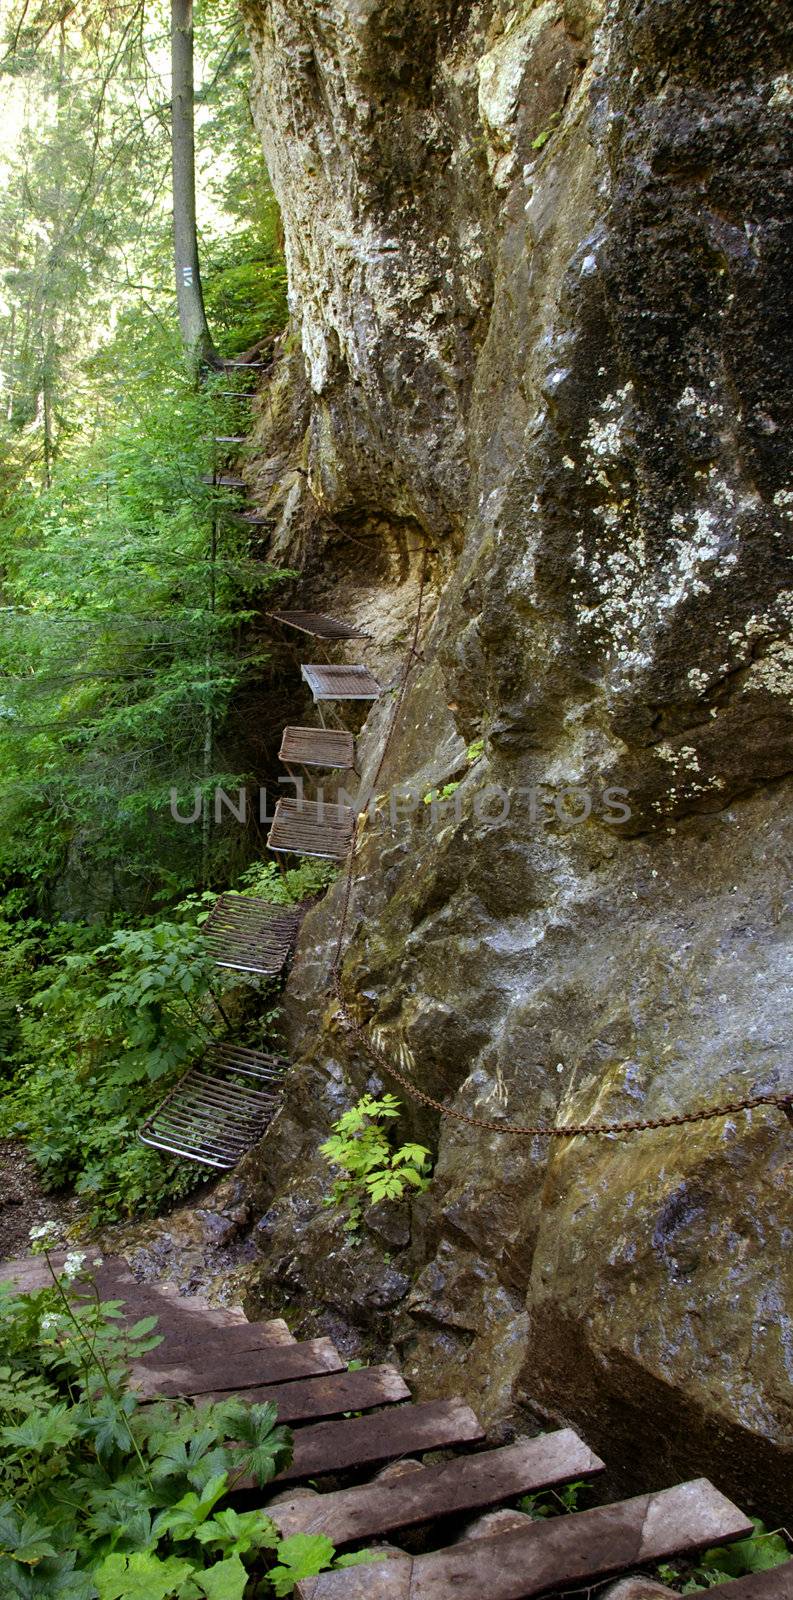 Extreme hiking and mountains climbing on wooden ledders and metal pads in Slovakian Paradise national park in Slovakia